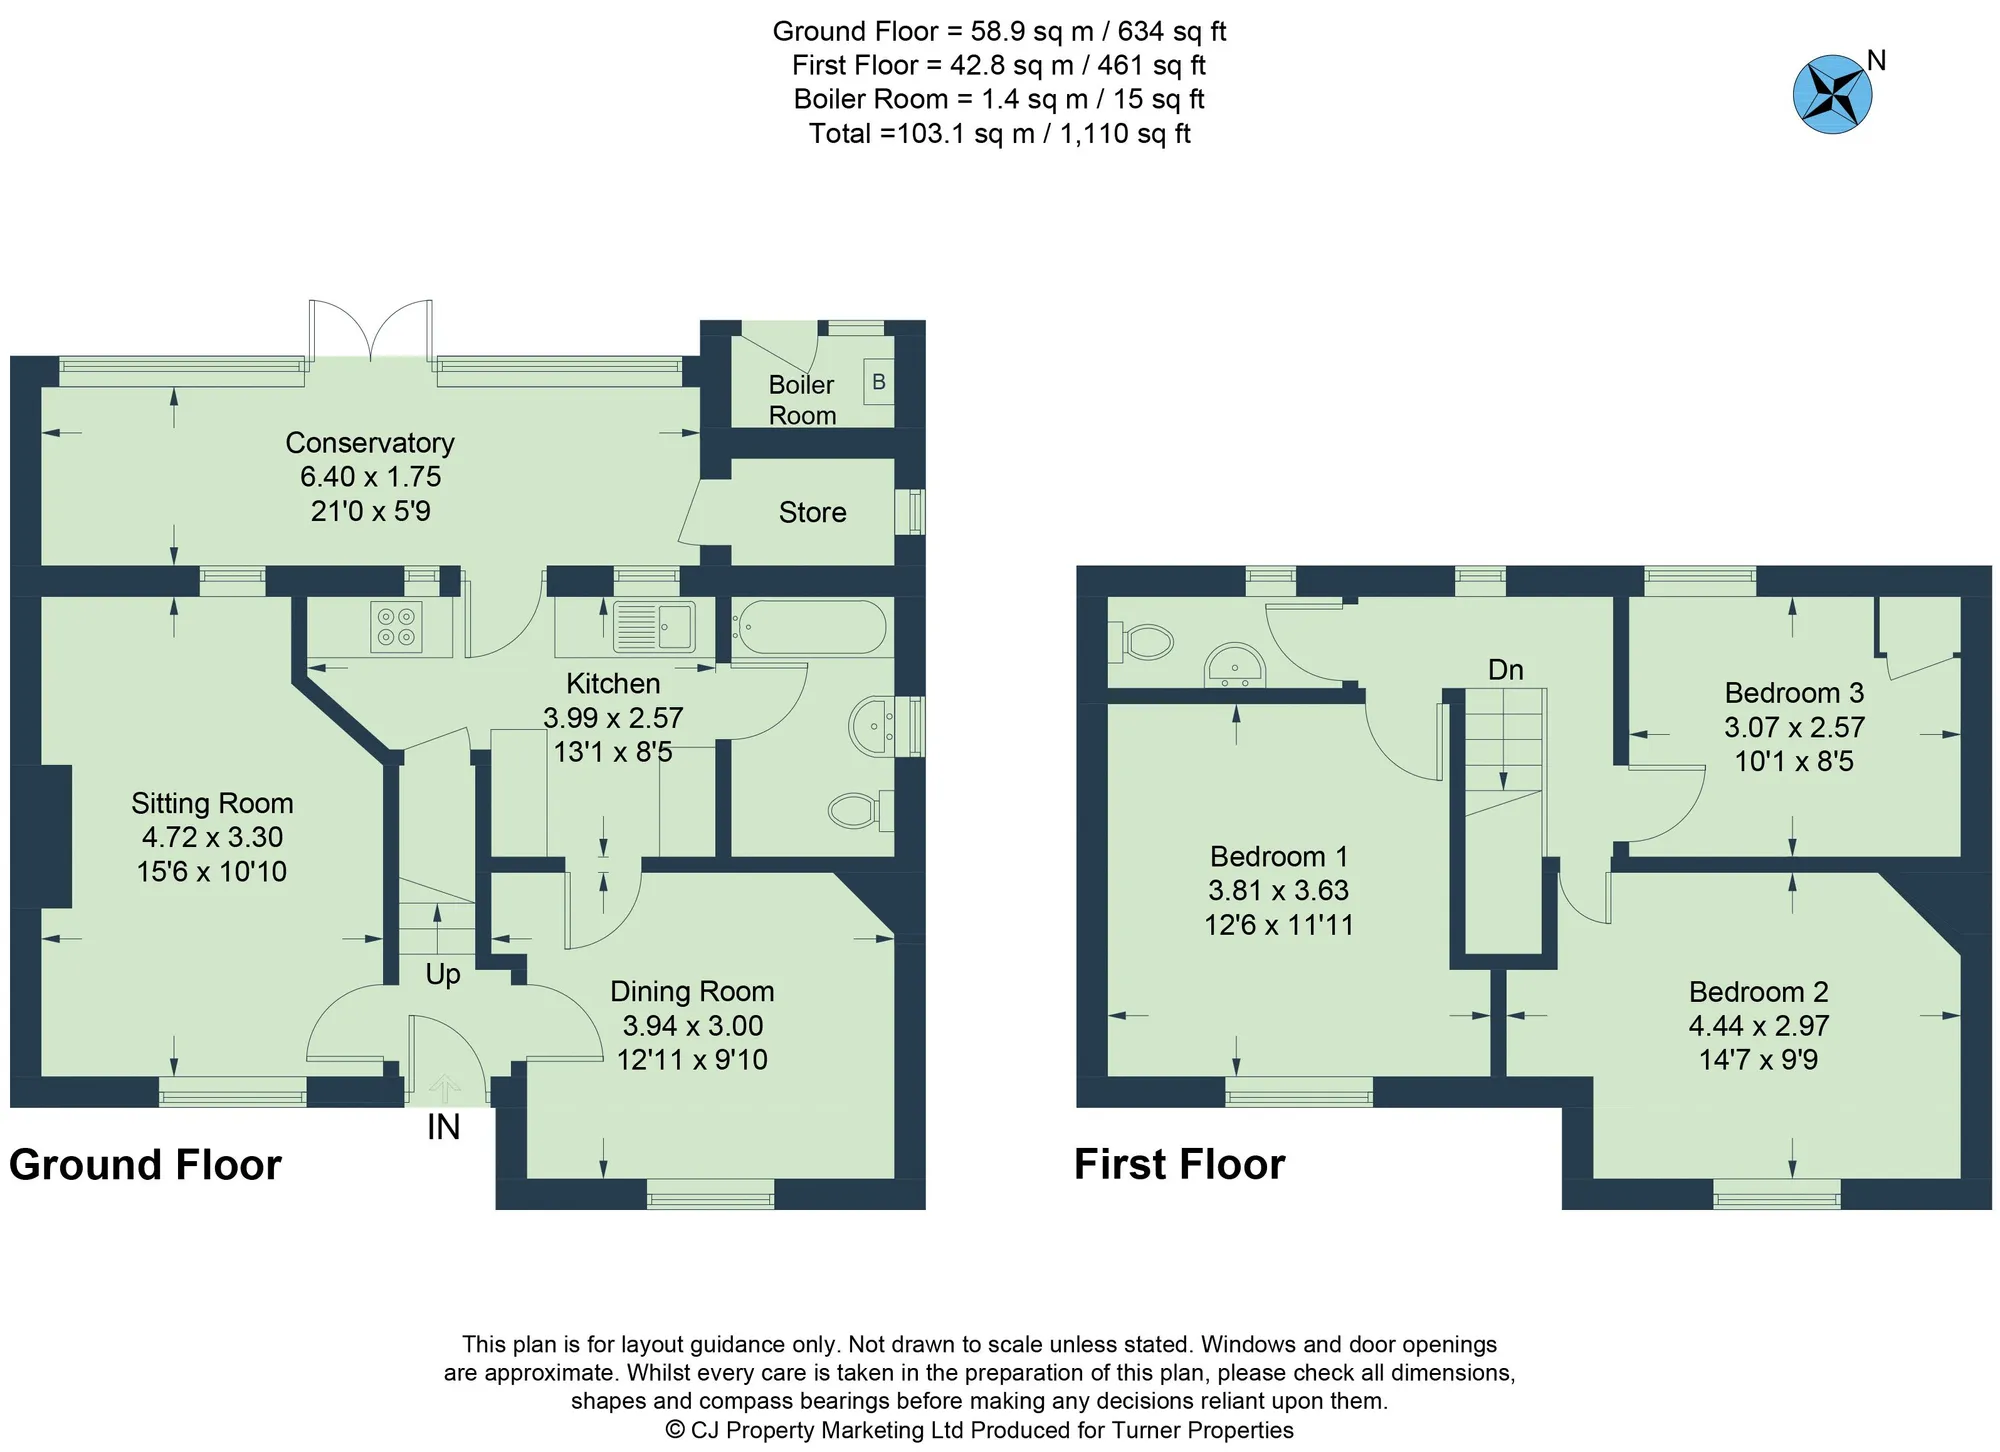 3 bed semi-detached house to rent in Cowley Road, Oxford - Property floorplan